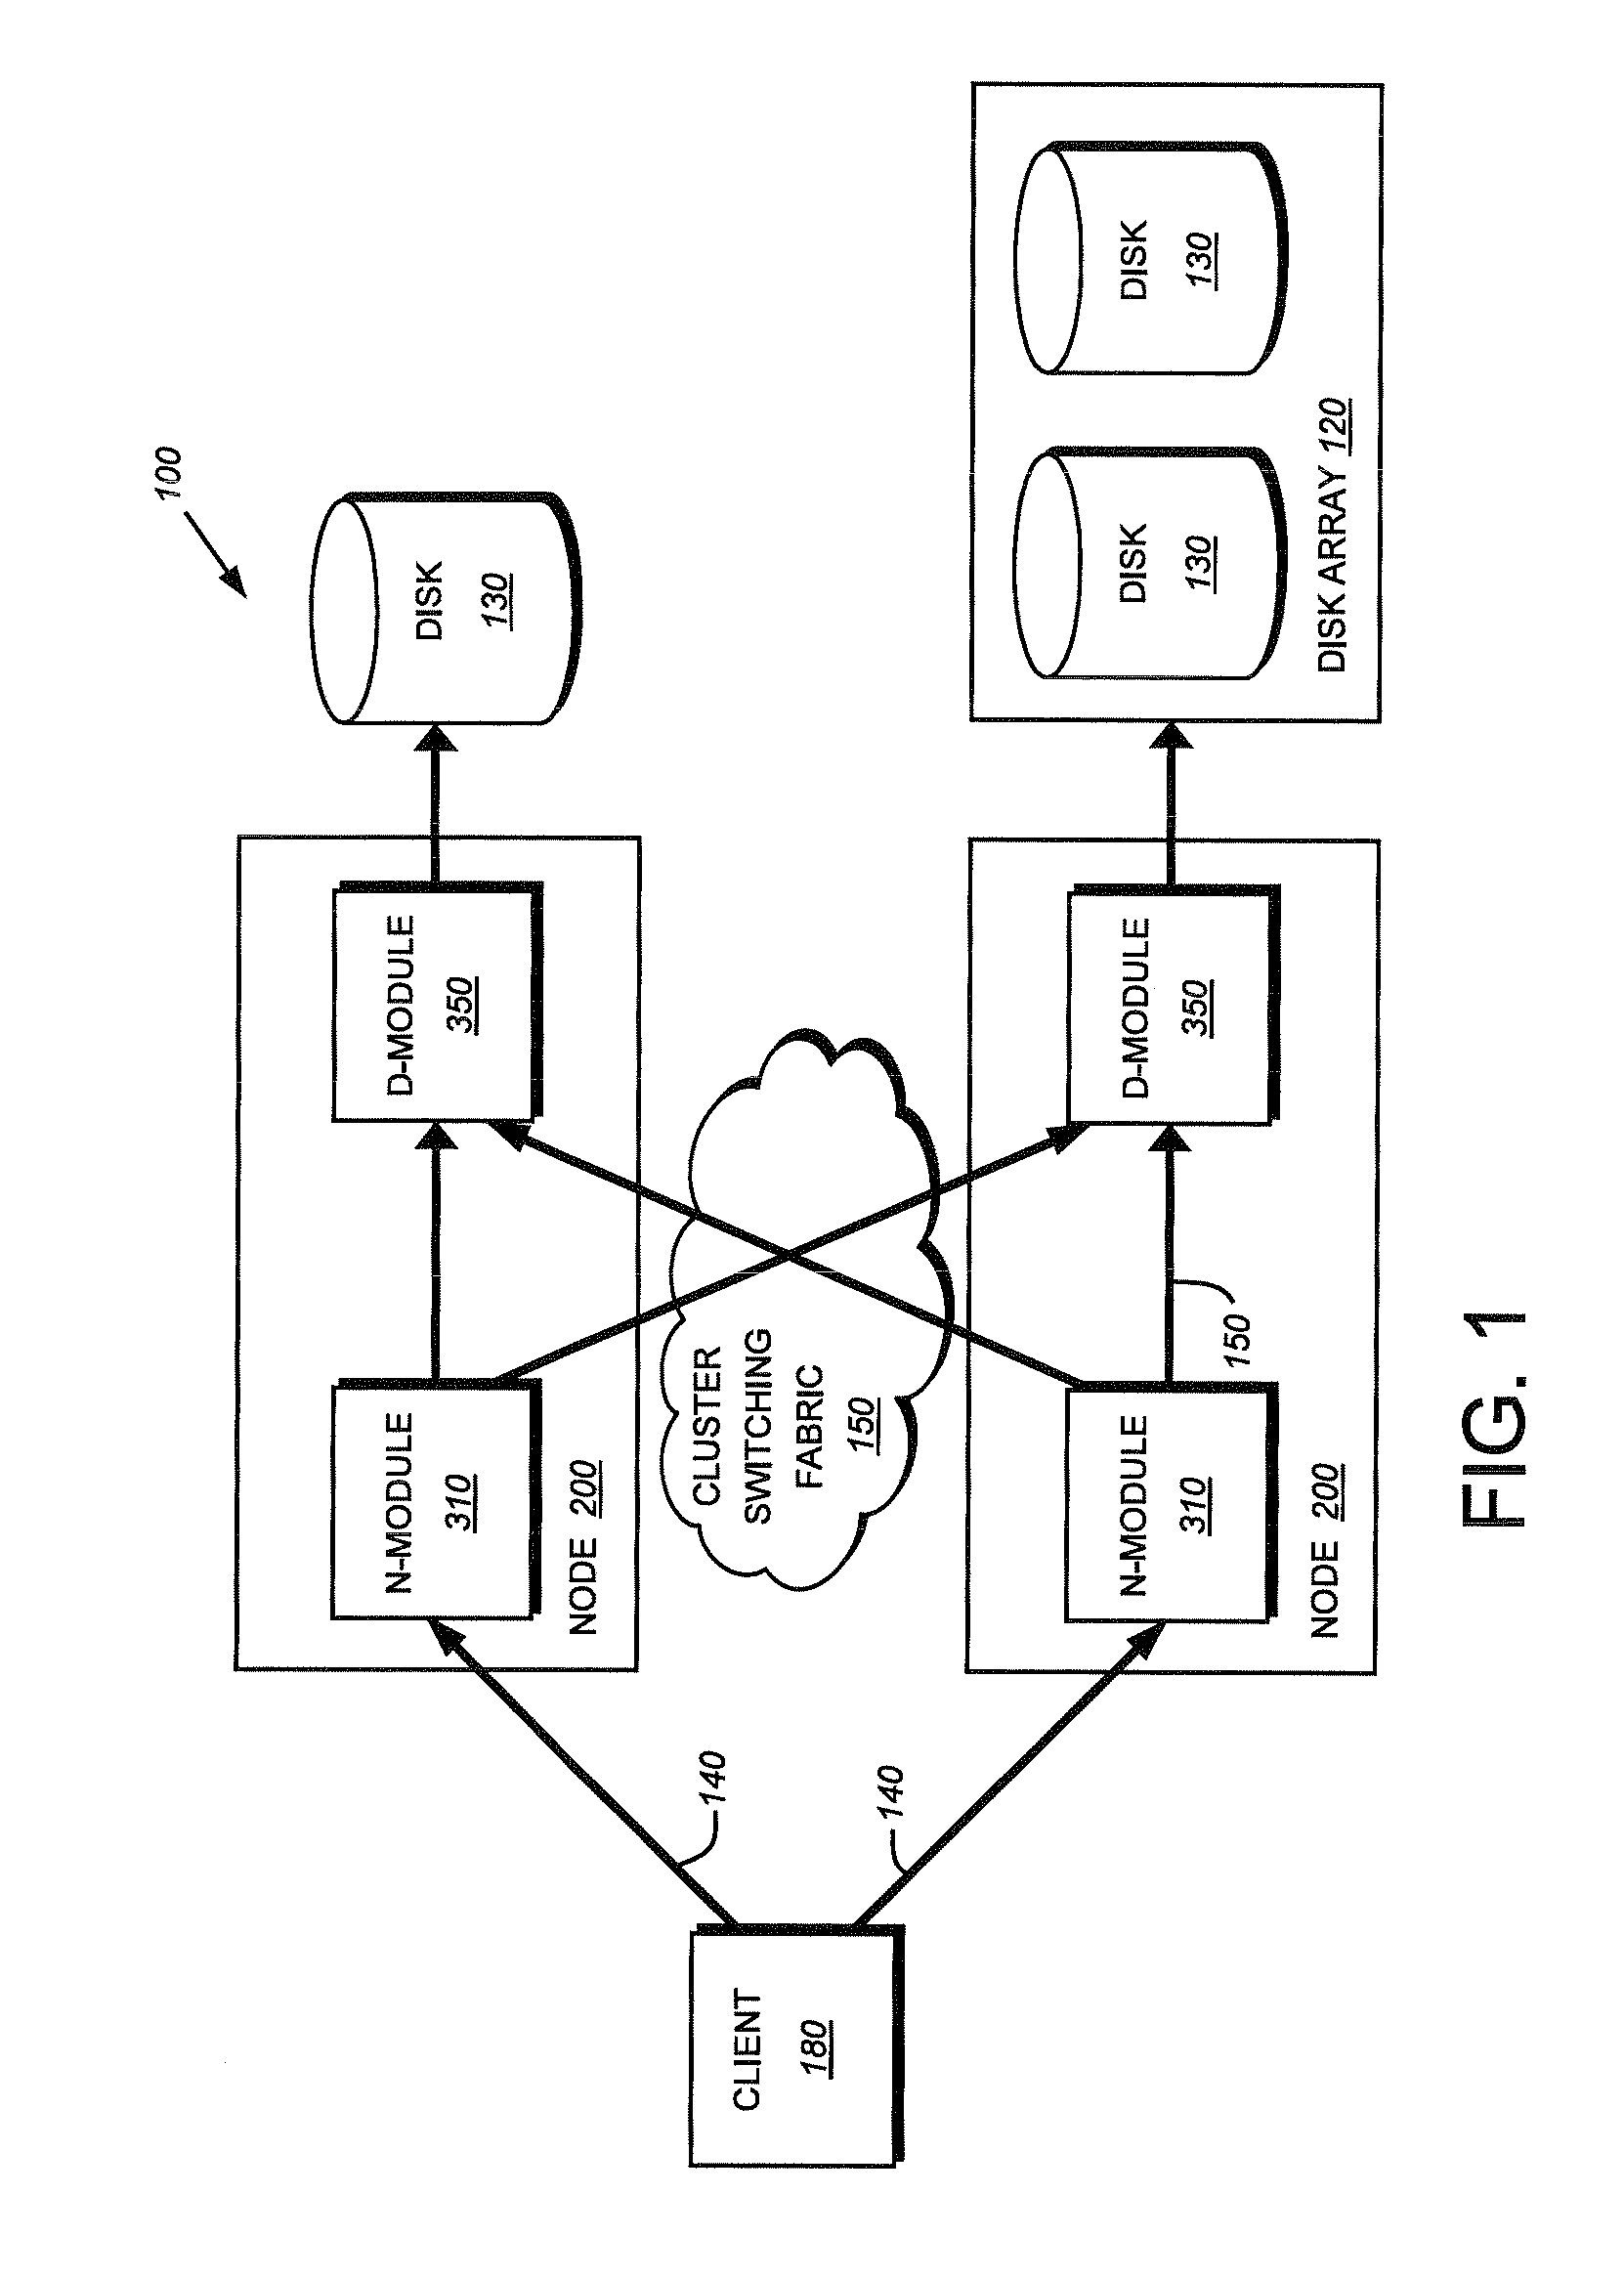 System and method for performing distributed consistency verification of a clustered file system